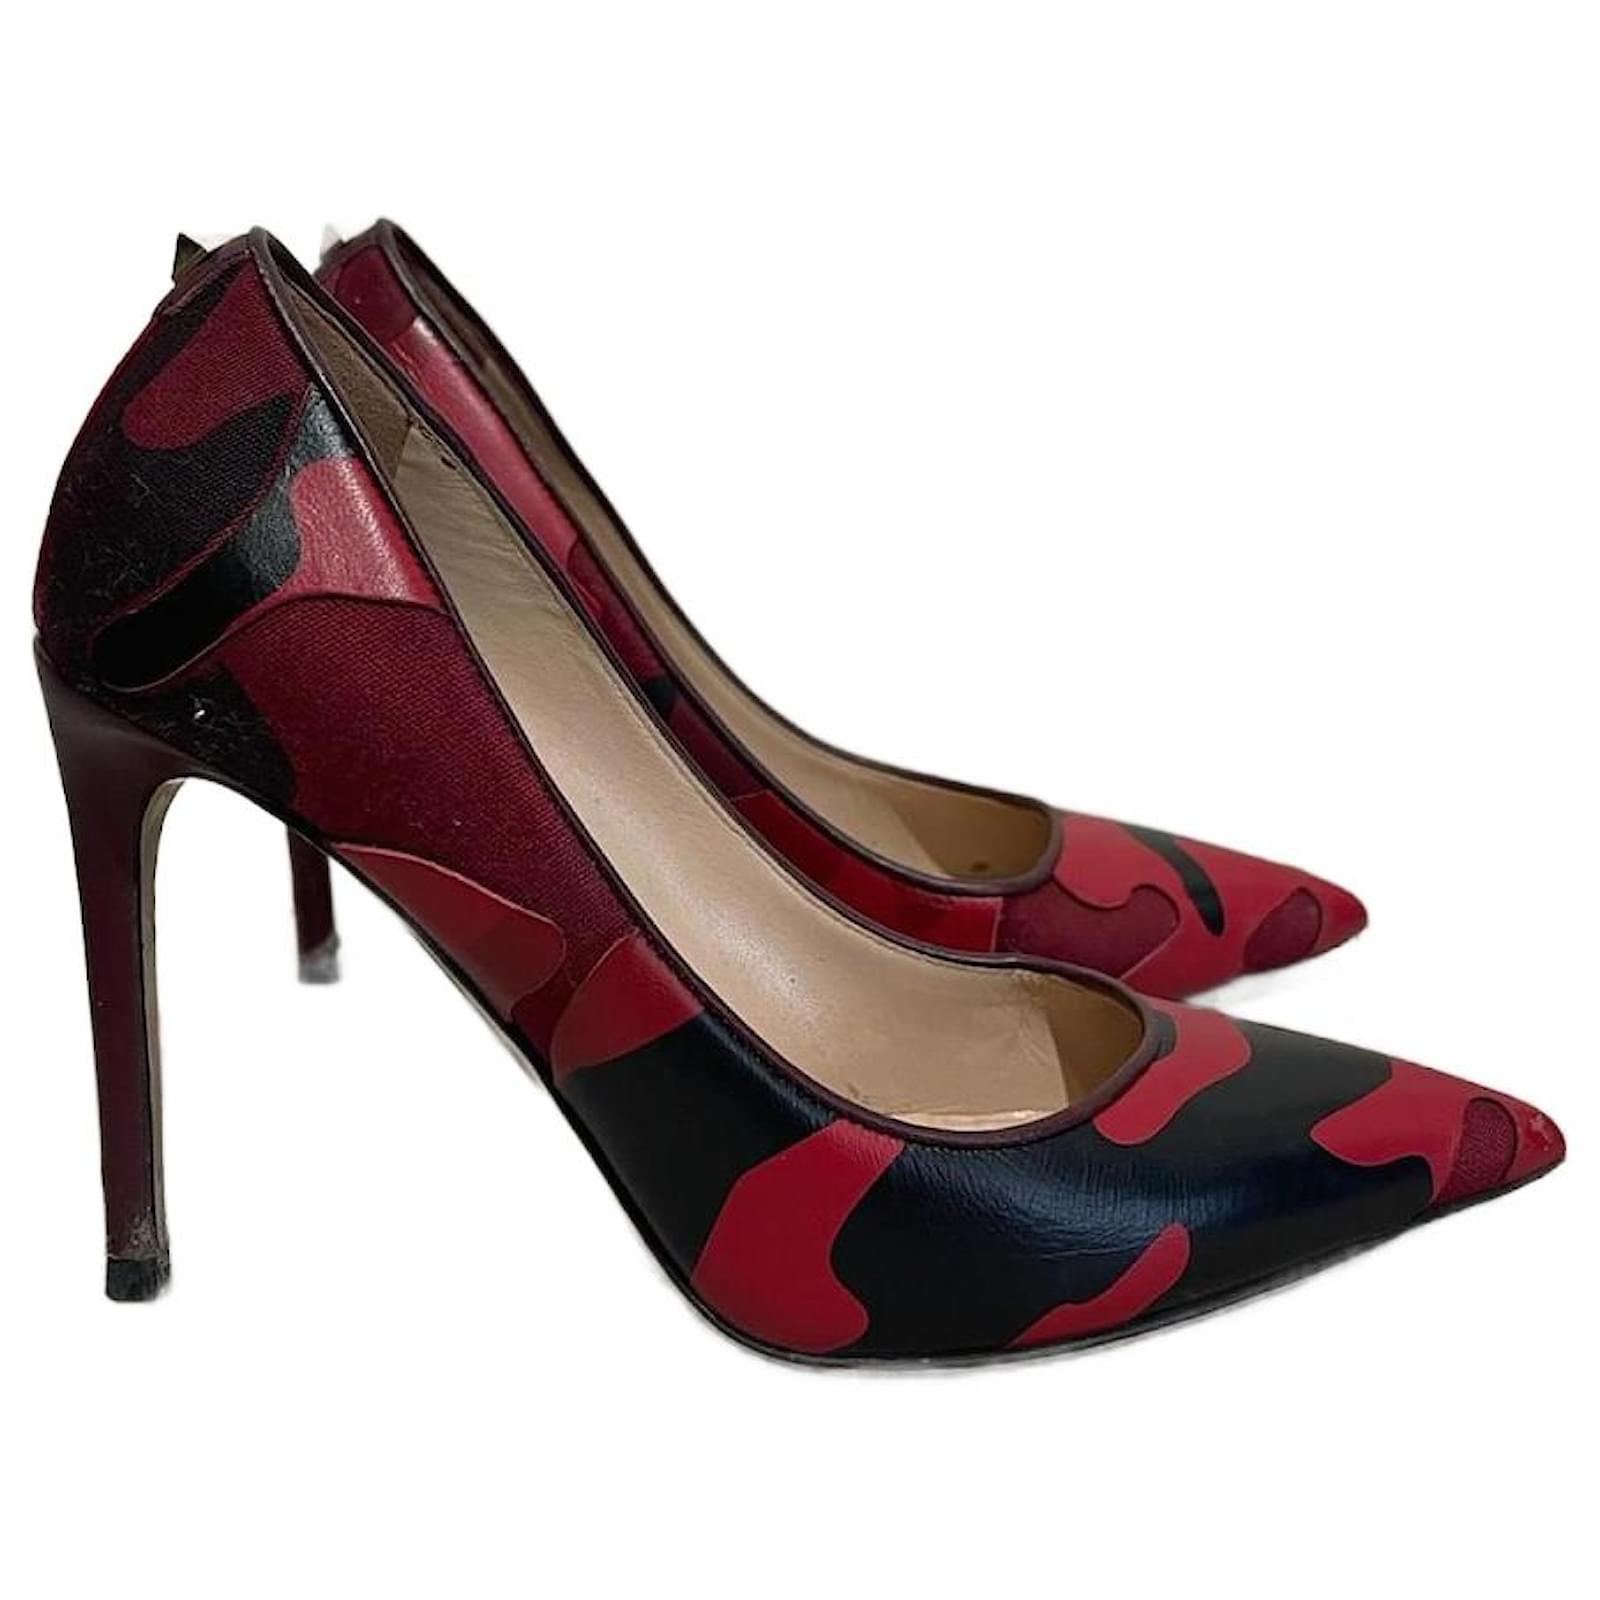 Shoes | Valentino shoes, Heels, Women shoes